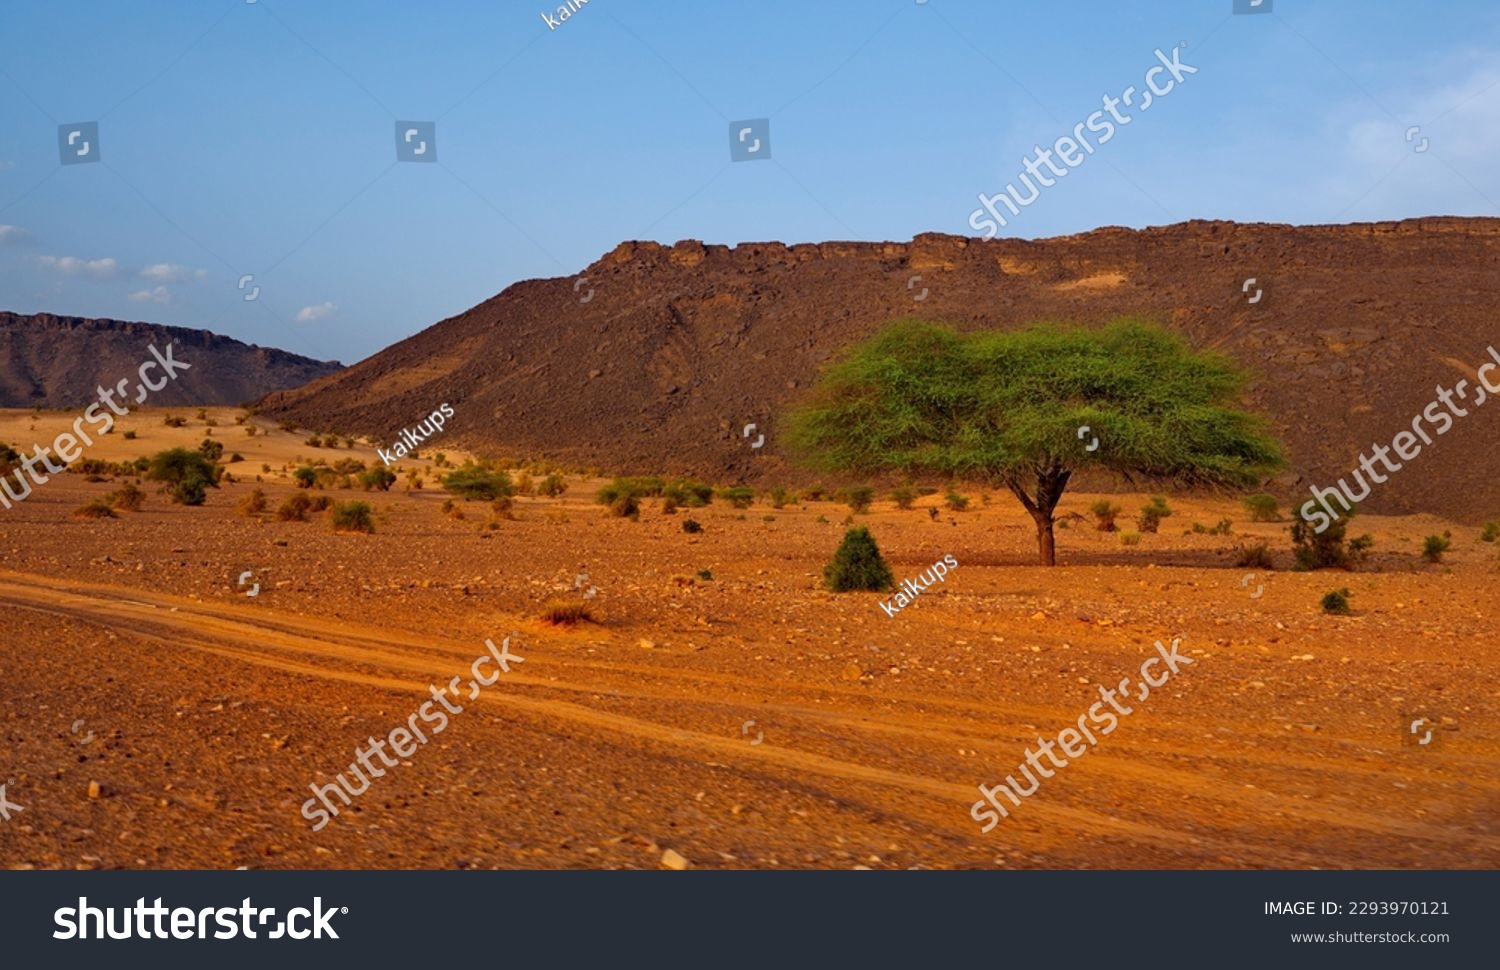 West Africa. Mauritania. Covered by the sands of the Sahara Desert, the valley of a dried-up river near the famous Terzhit oasis. #2293970121